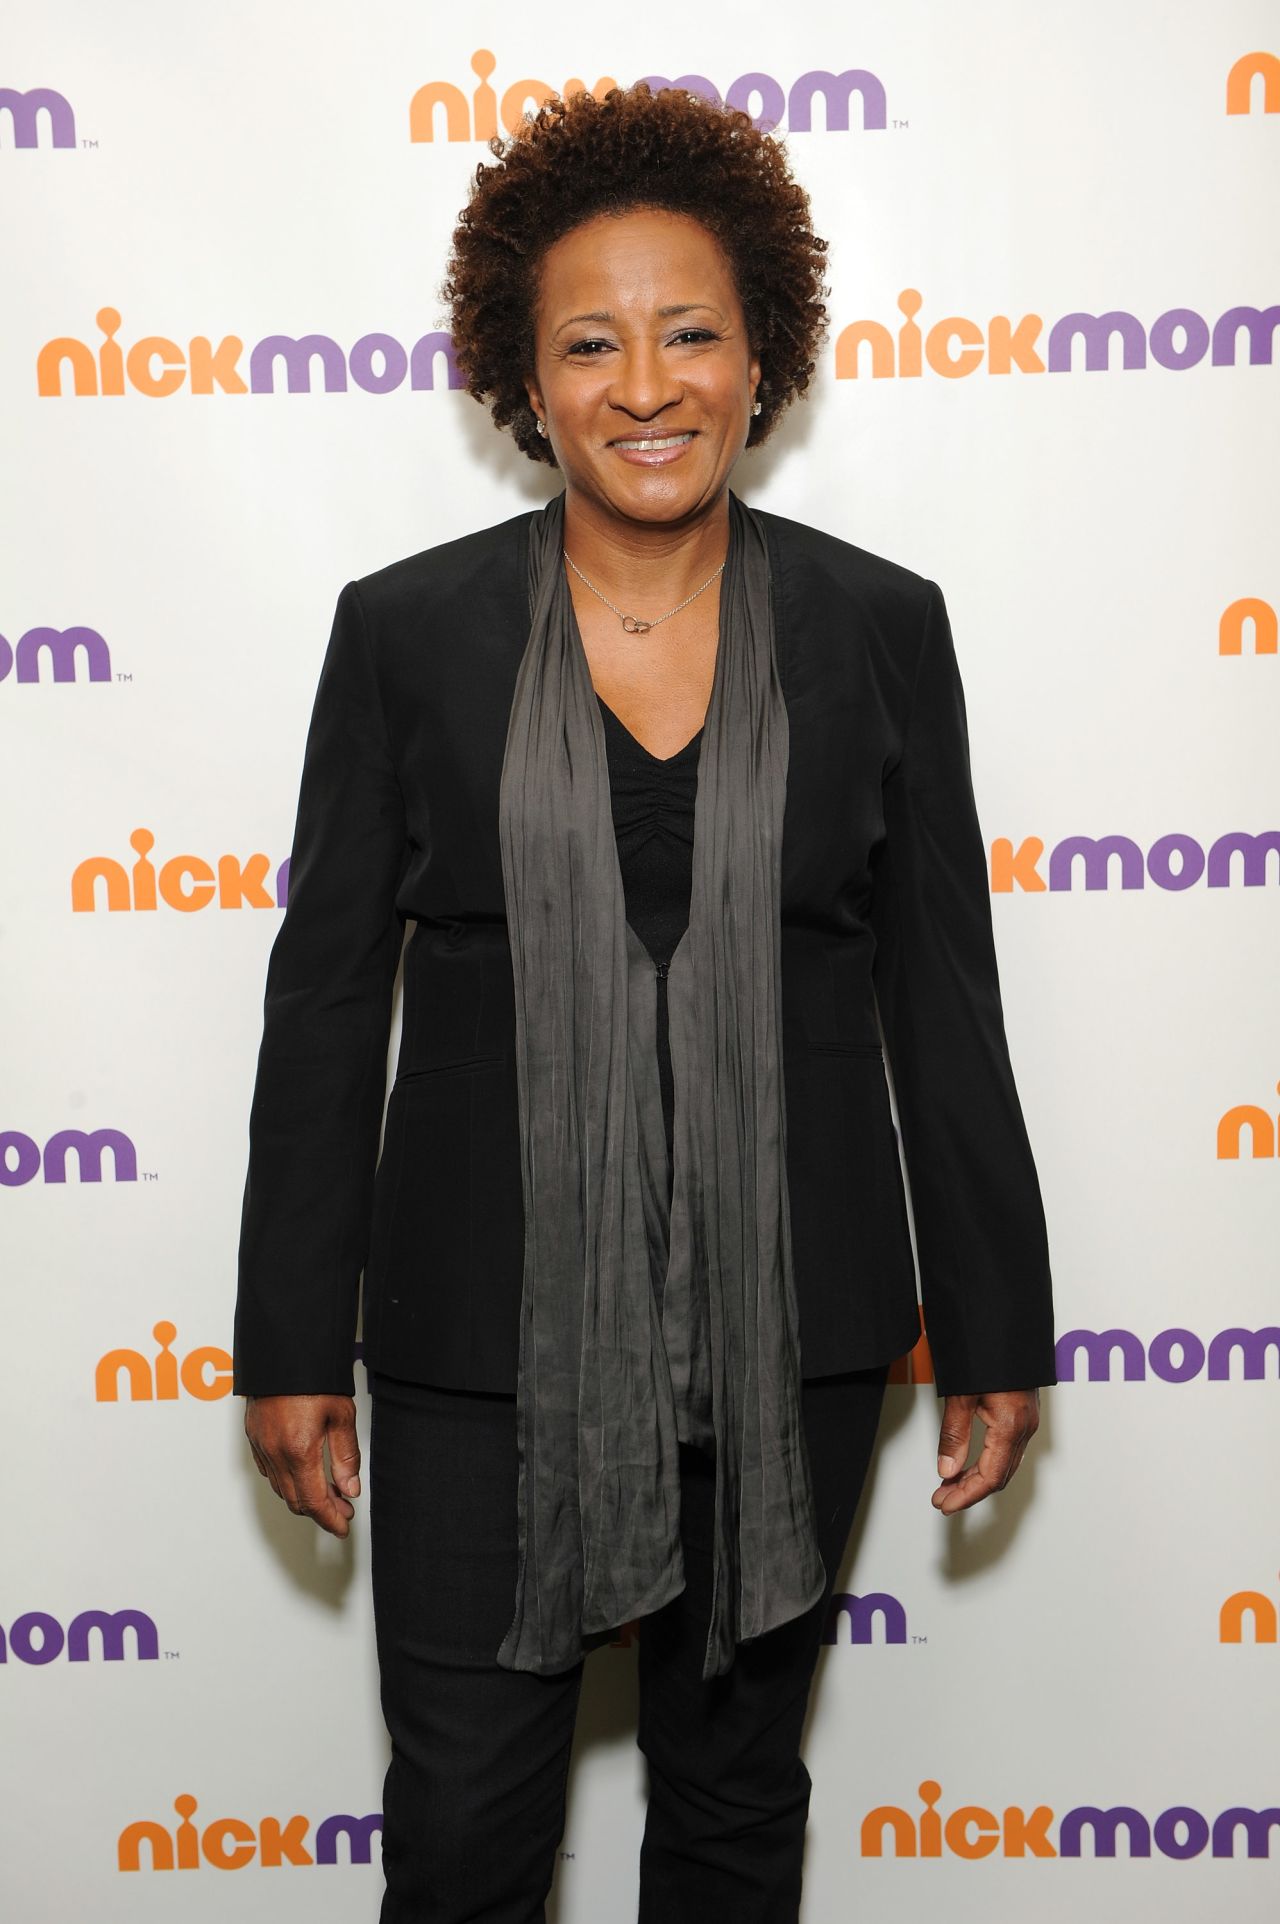 Besides being a gifted comedian, Wanda Sykes is an old pro -- she hosted and executive produced "The Wanda Sykes Show" on Fox in 2010. The show <a href="http://www.deadline.com/2010/05/fox-to-cancel-the-wanda-sykes-show/" target="_blank" target="_blank">only lasted one season</a>, but who knows what could happen if she stepped into one of the established brands?